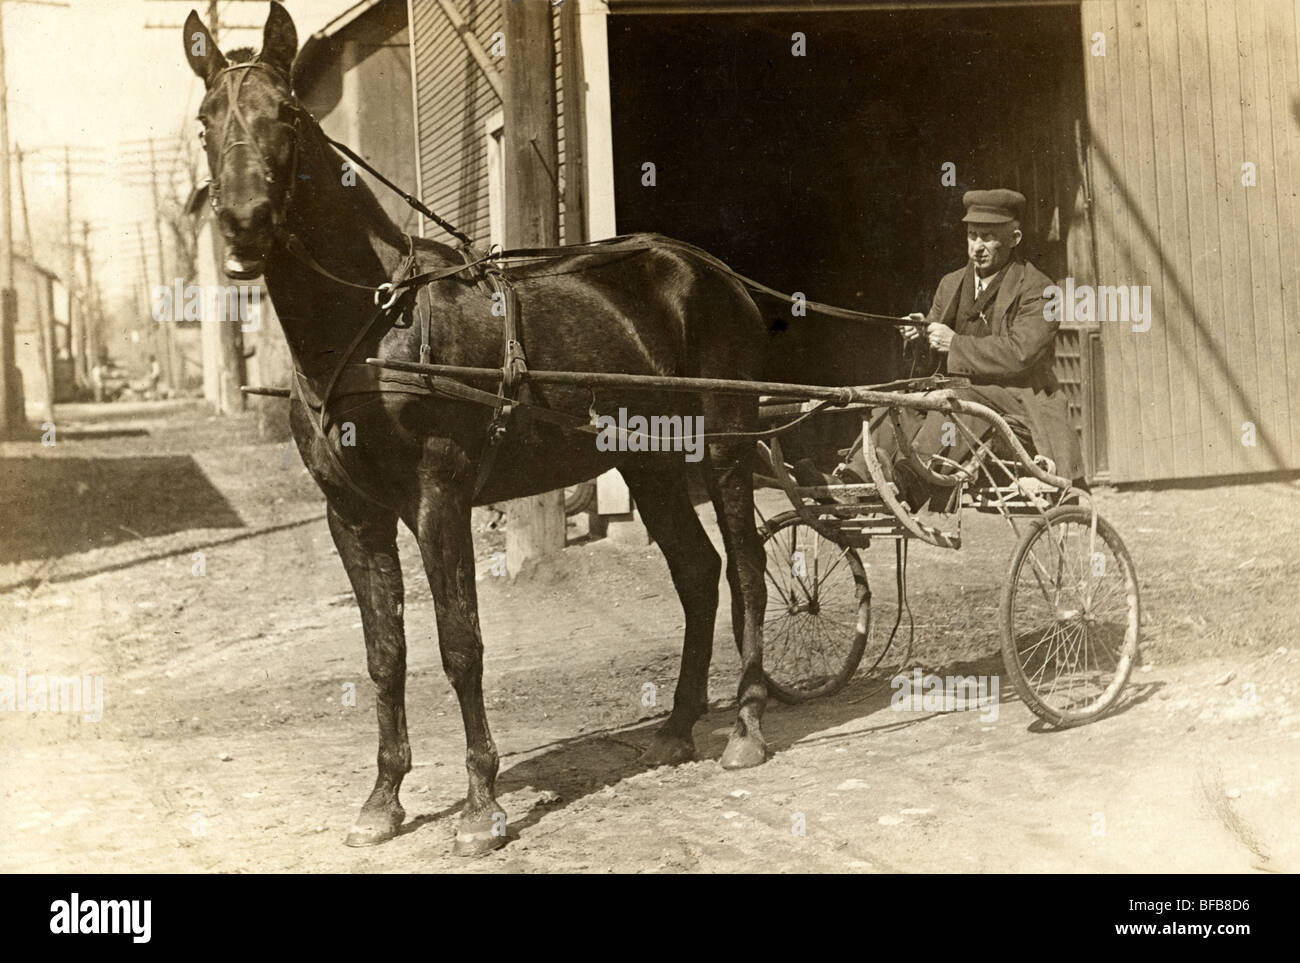 Older Man Driving Horse Drawn Sulky Cart Stock Photo